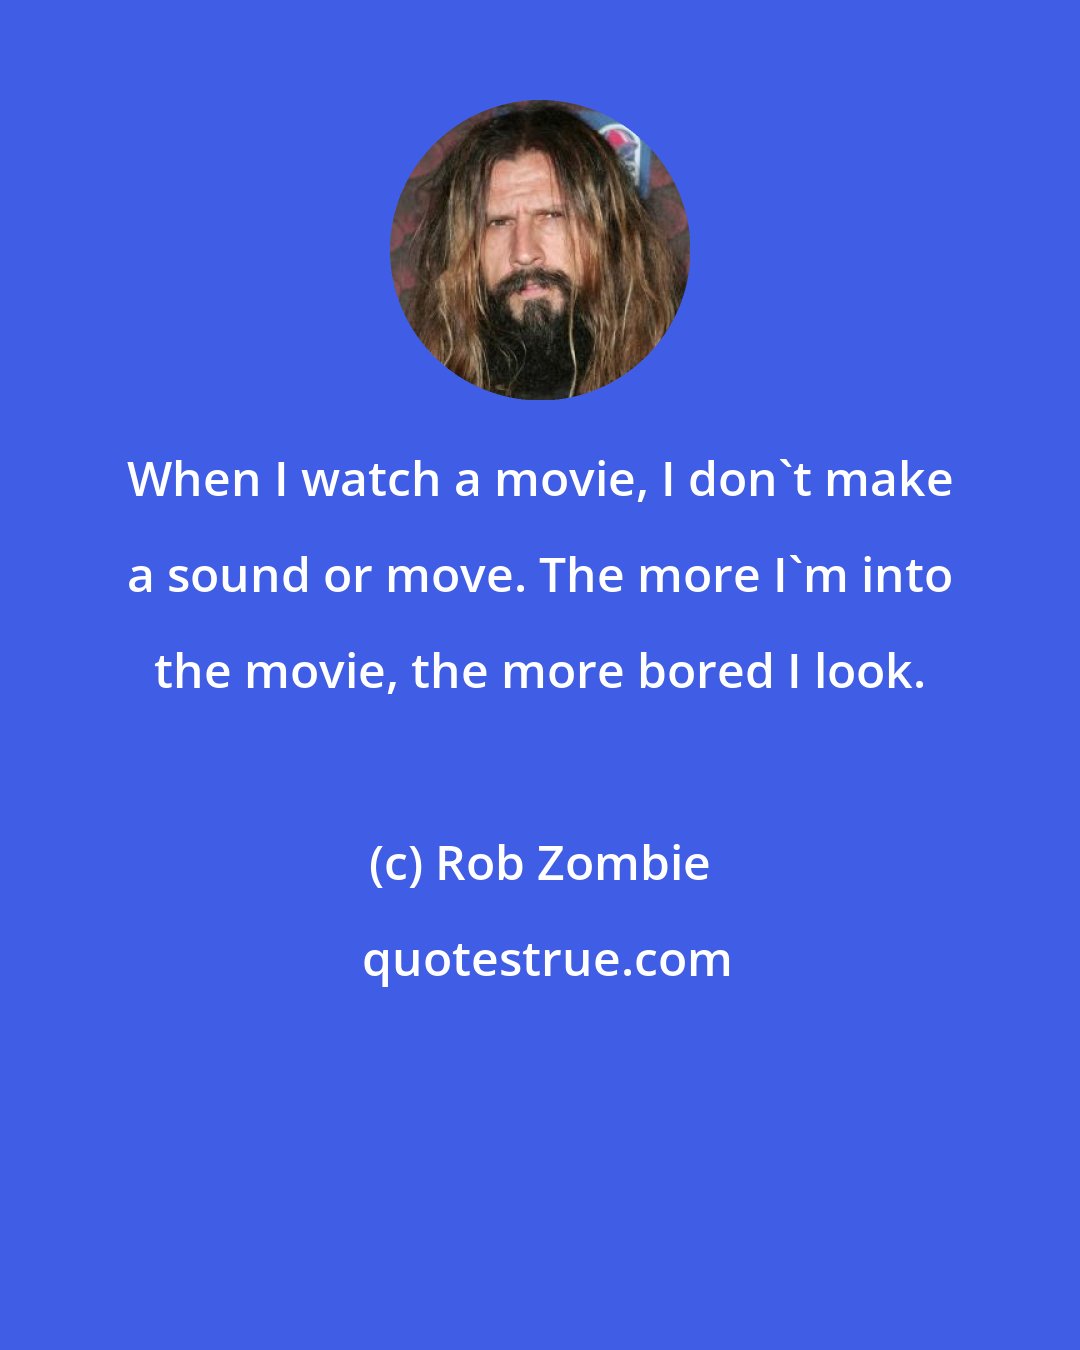 Rob Zombie: When I watch a movie, I don't make a sound or move. The more I'm into the movie, the more bored I look.